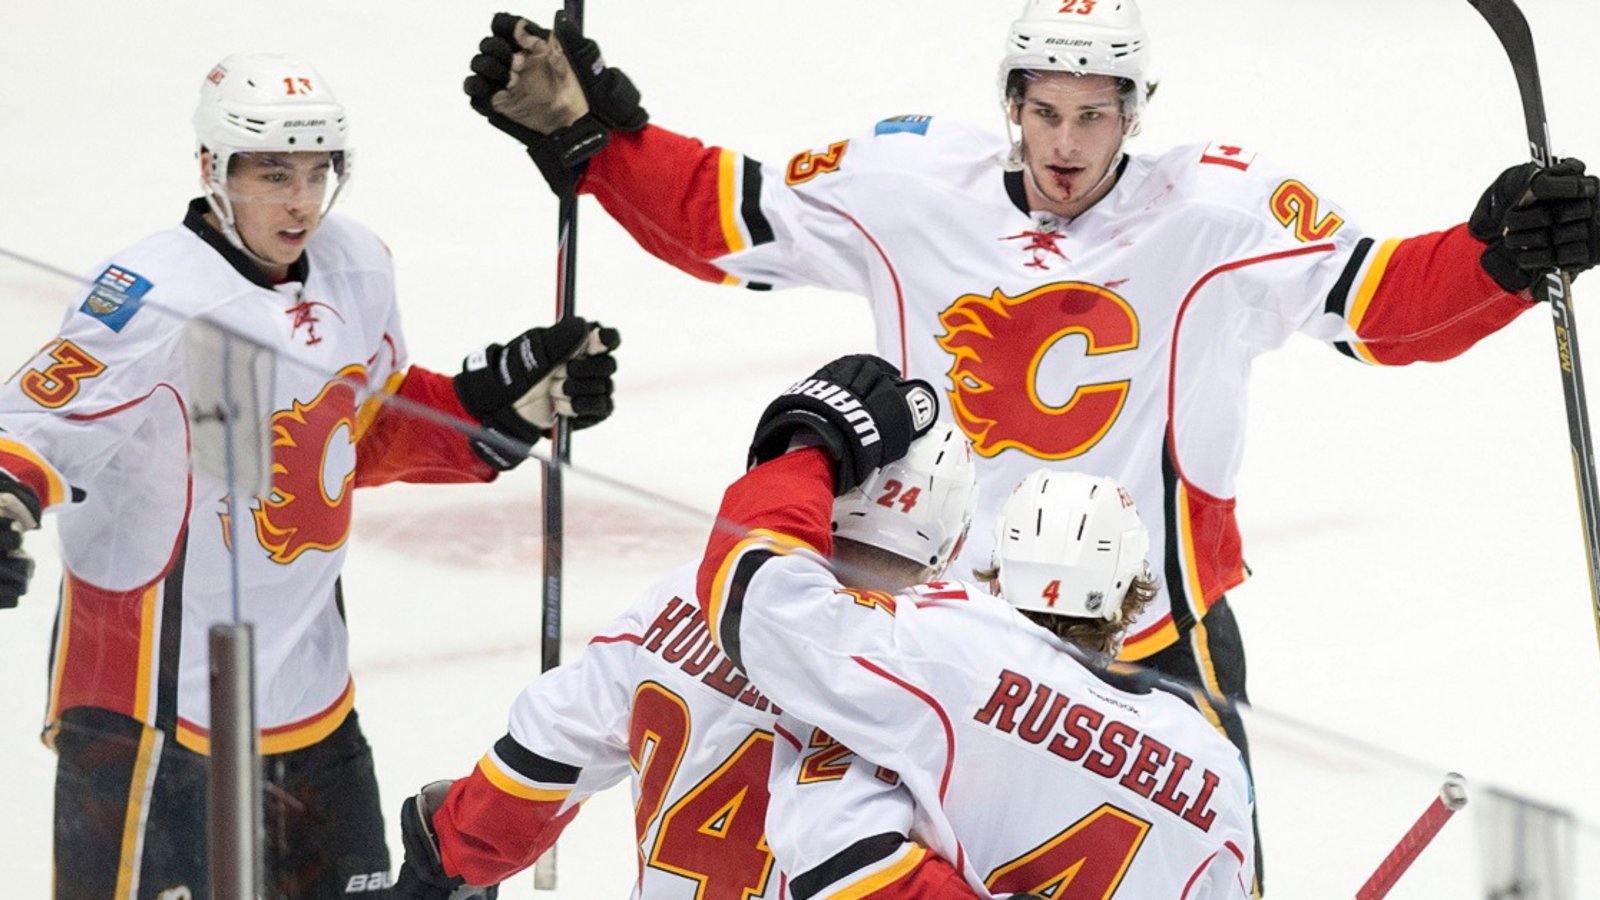 Flames forward reveals he was playing with significant injury.